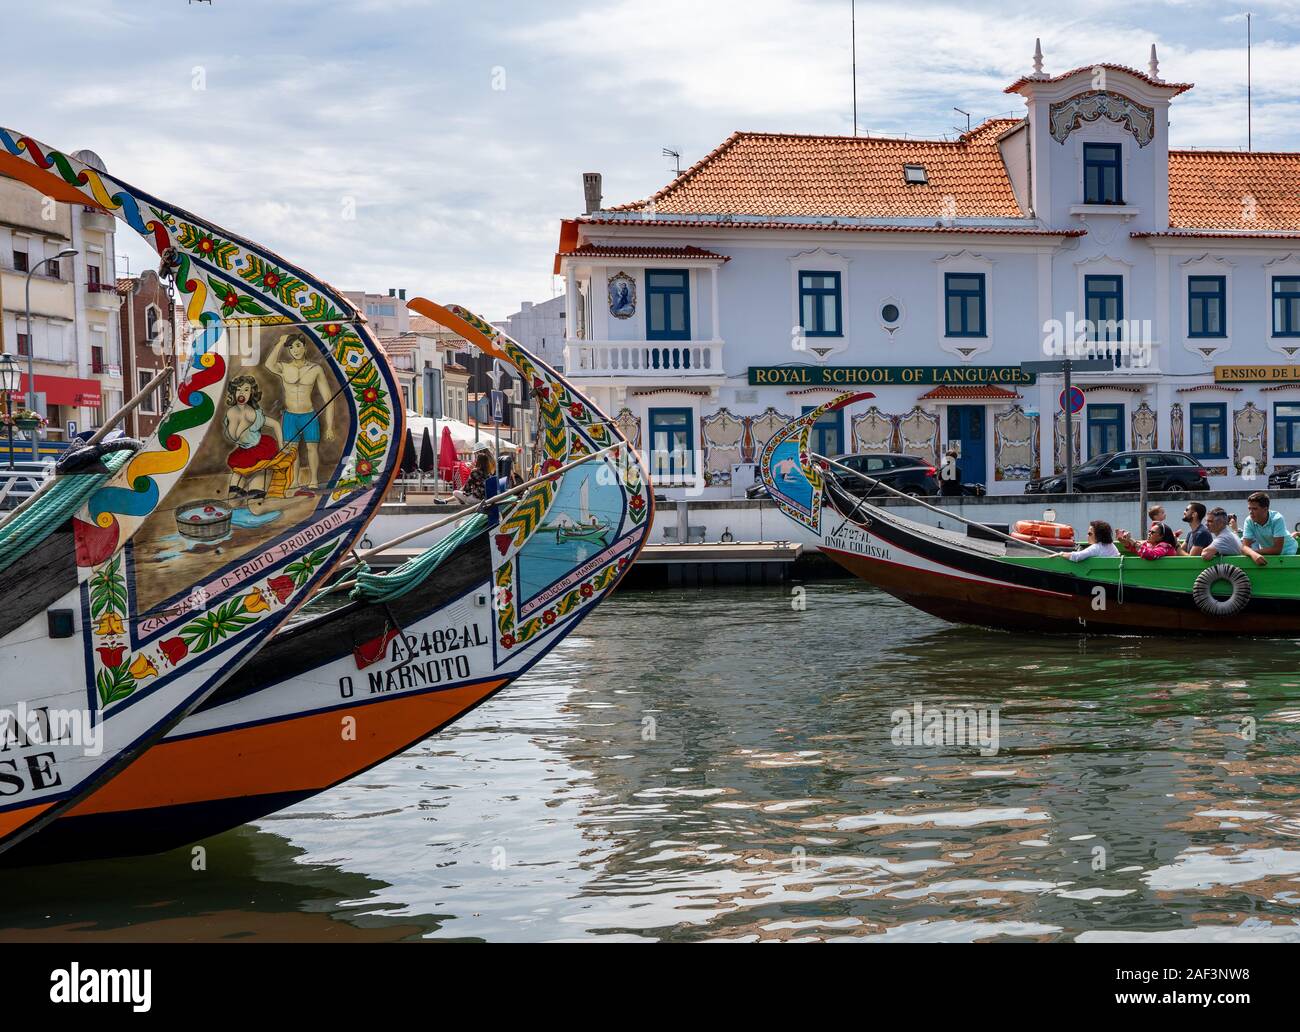 Aveiro, Portugal - 19 August 2019: Risque paintings on the rudder of the tourist boats on Aveiro canals Stock Photo